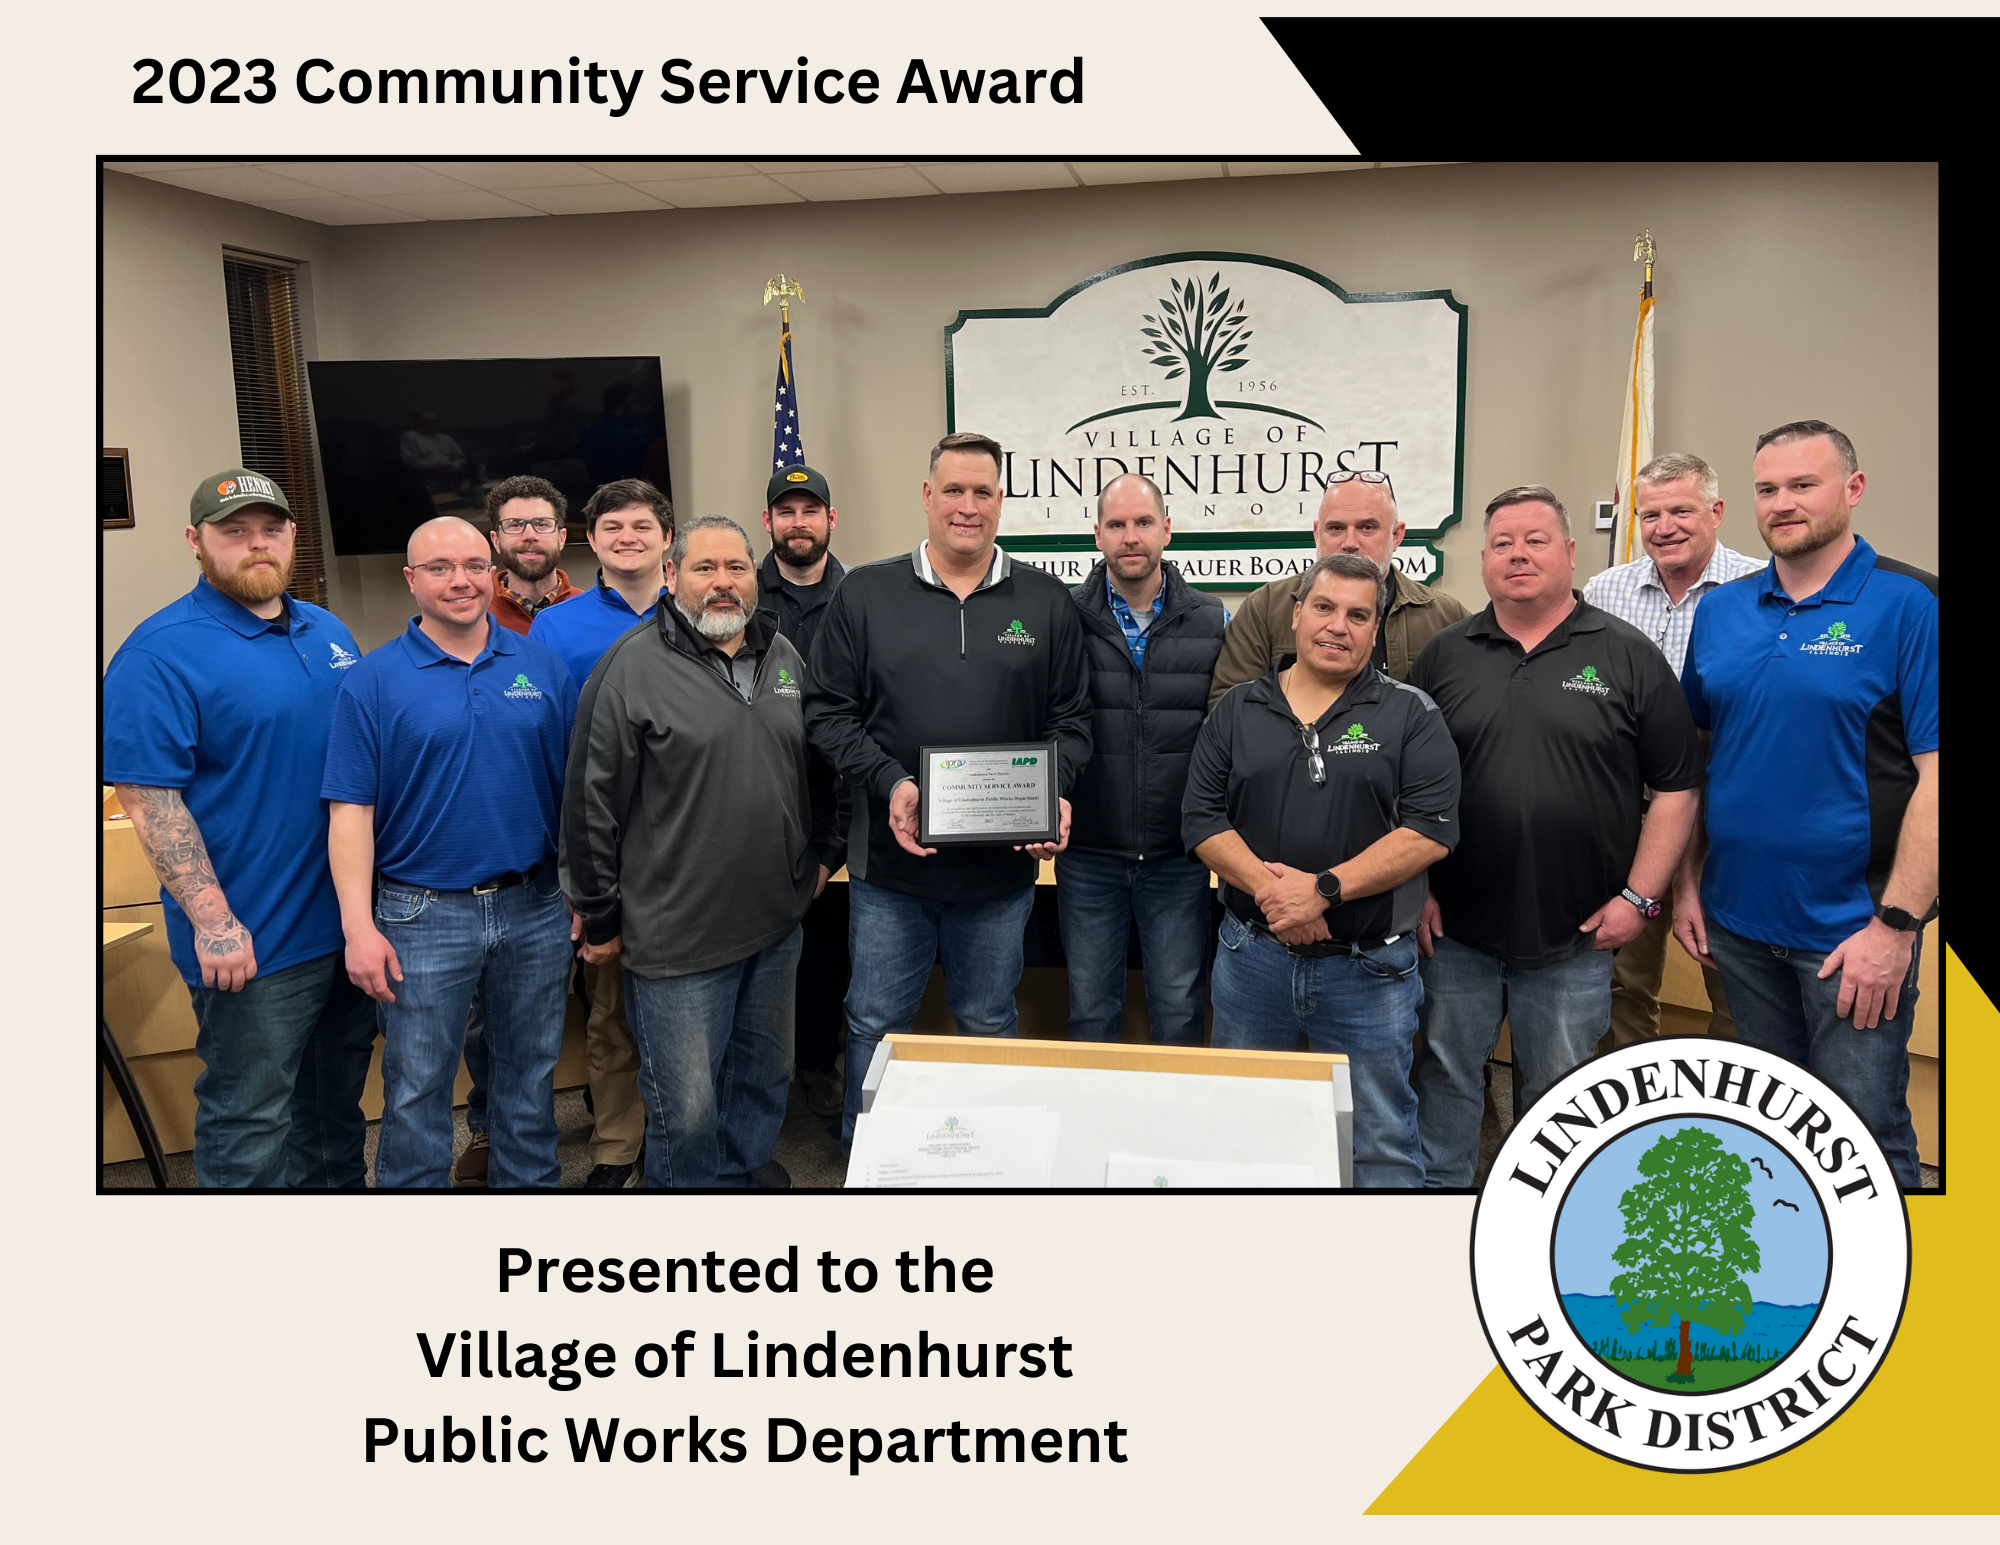 The image shows a group of men from the Village of Lindenhurst Public Works Department receiving the 2023 Community Service Award. They are standing in a room with the Village of Lindenhurst seal in the background, holding a plaque that commemorates the award.